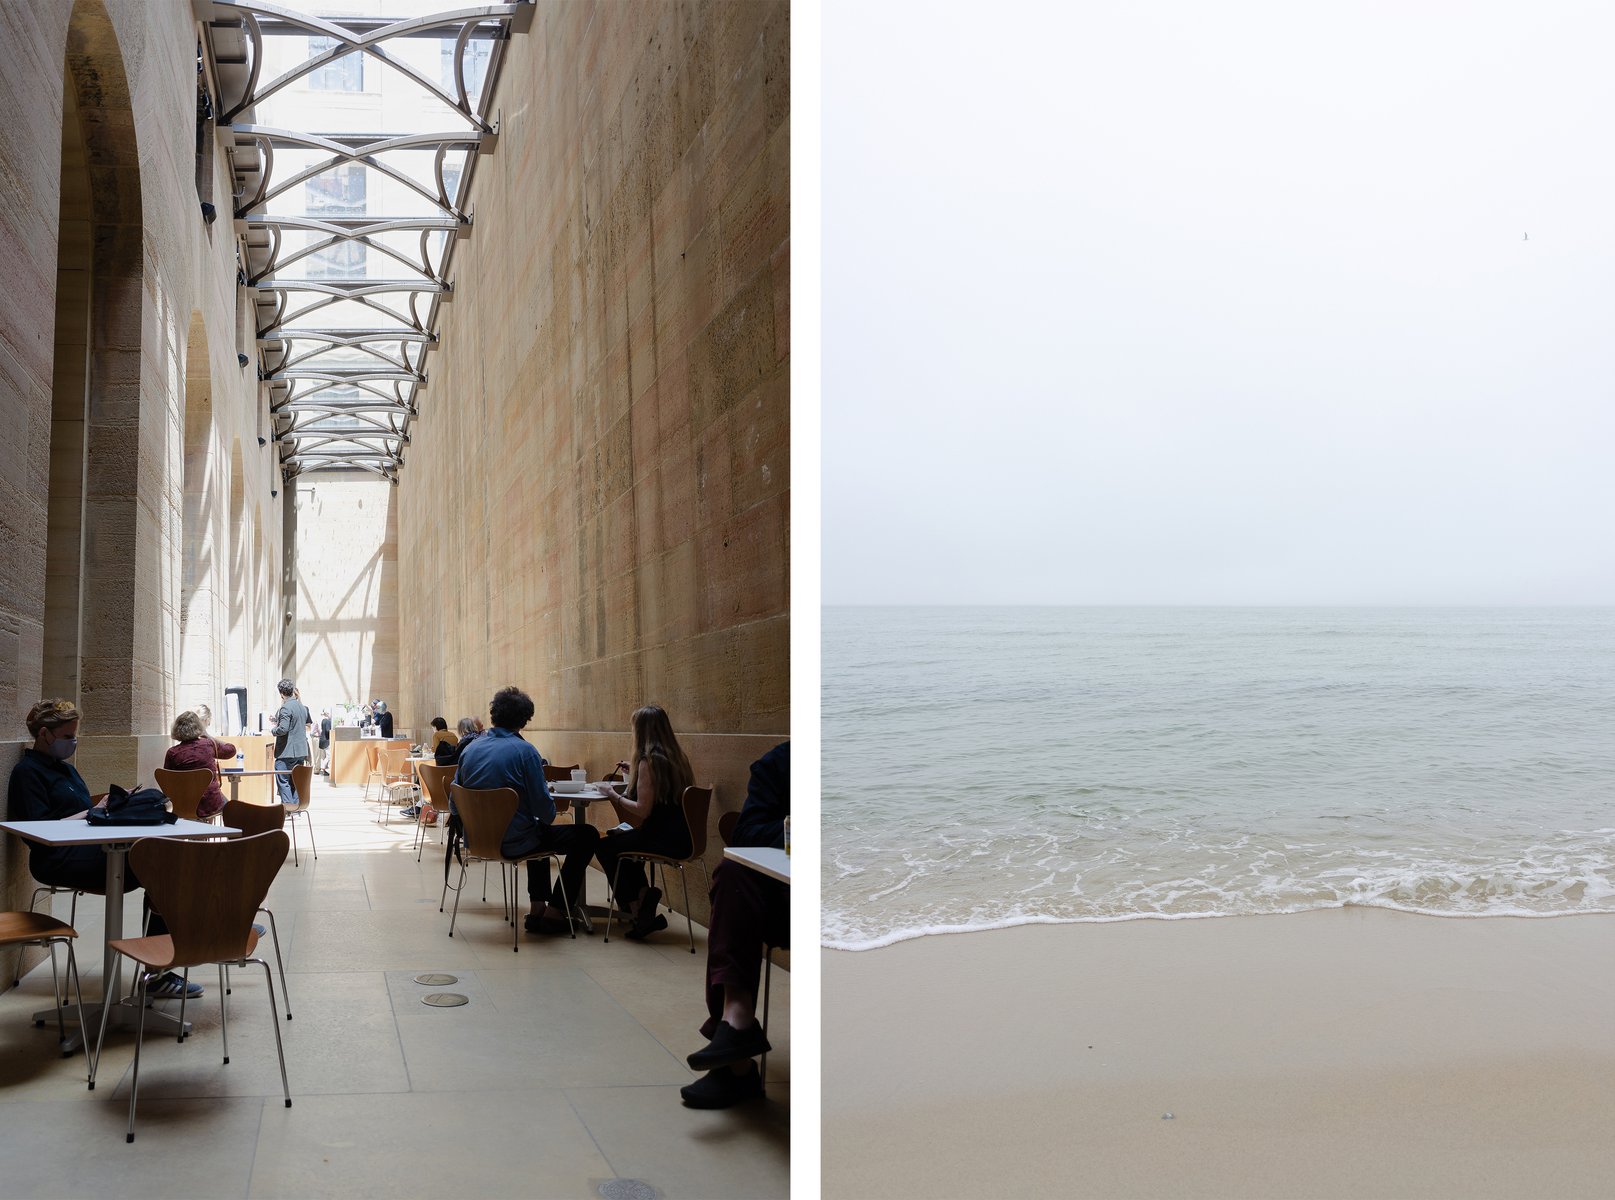  Personal Work
Dyptich:

Left image: the dining hall of the Philly Art Museum filled with people at small tables under a large, sculptural skylight.

Right image: the calm, hazy ocean lapping the shore against an overcast sky. by Sydney SG